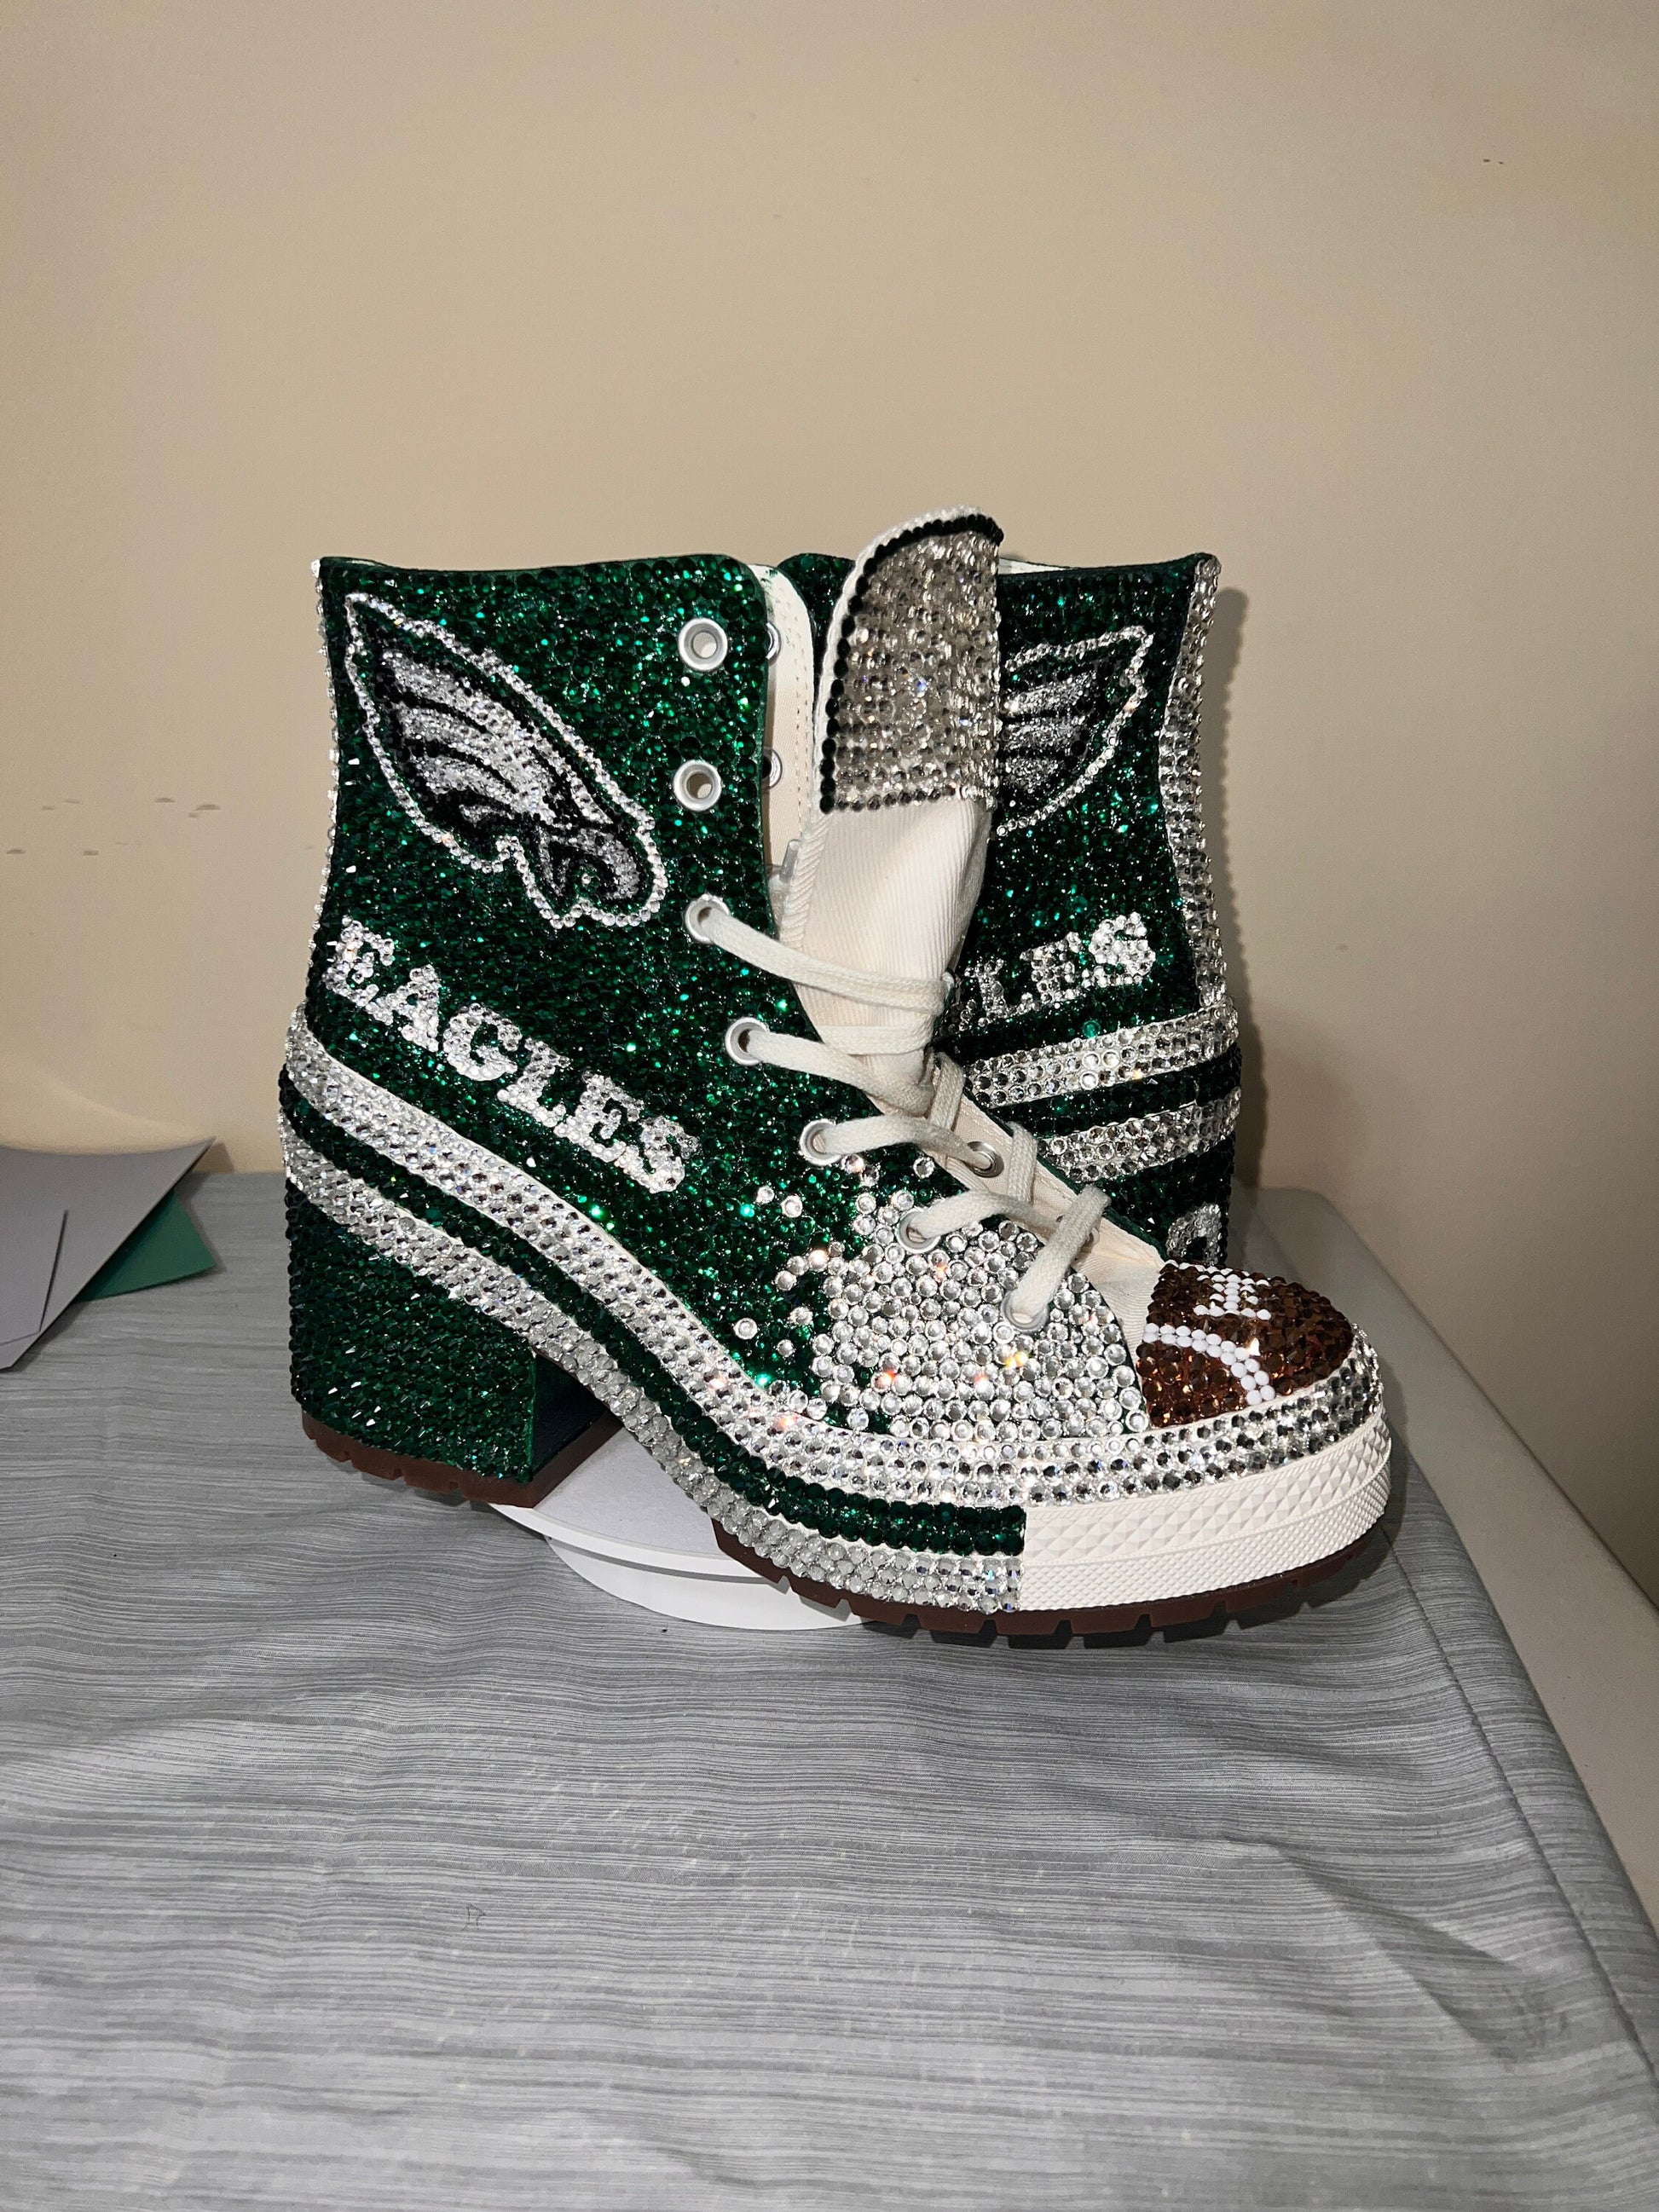 Professional or College Tennis Shoes, converse, wedding, quinceanera, –  Allblingedoutitn Bling Boutique